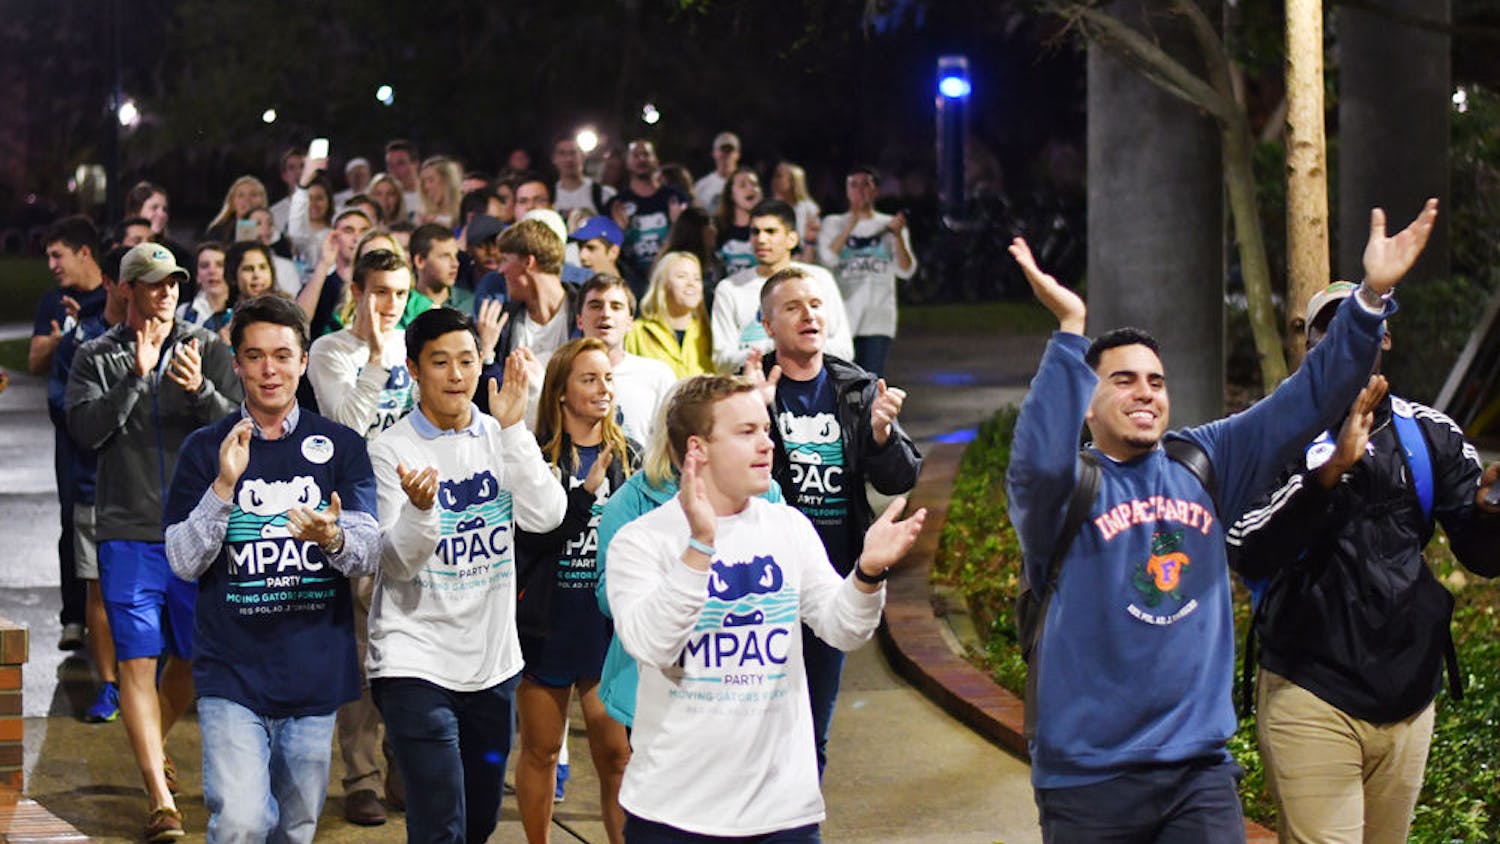 The Impact Party walks to the Reitz Union Breezeway on Feb. 22, 2017, chanting “I-M-P-A-C-T. Impact is for you and me.” The Impact Party won 48 seats in the Spring 2017 election.